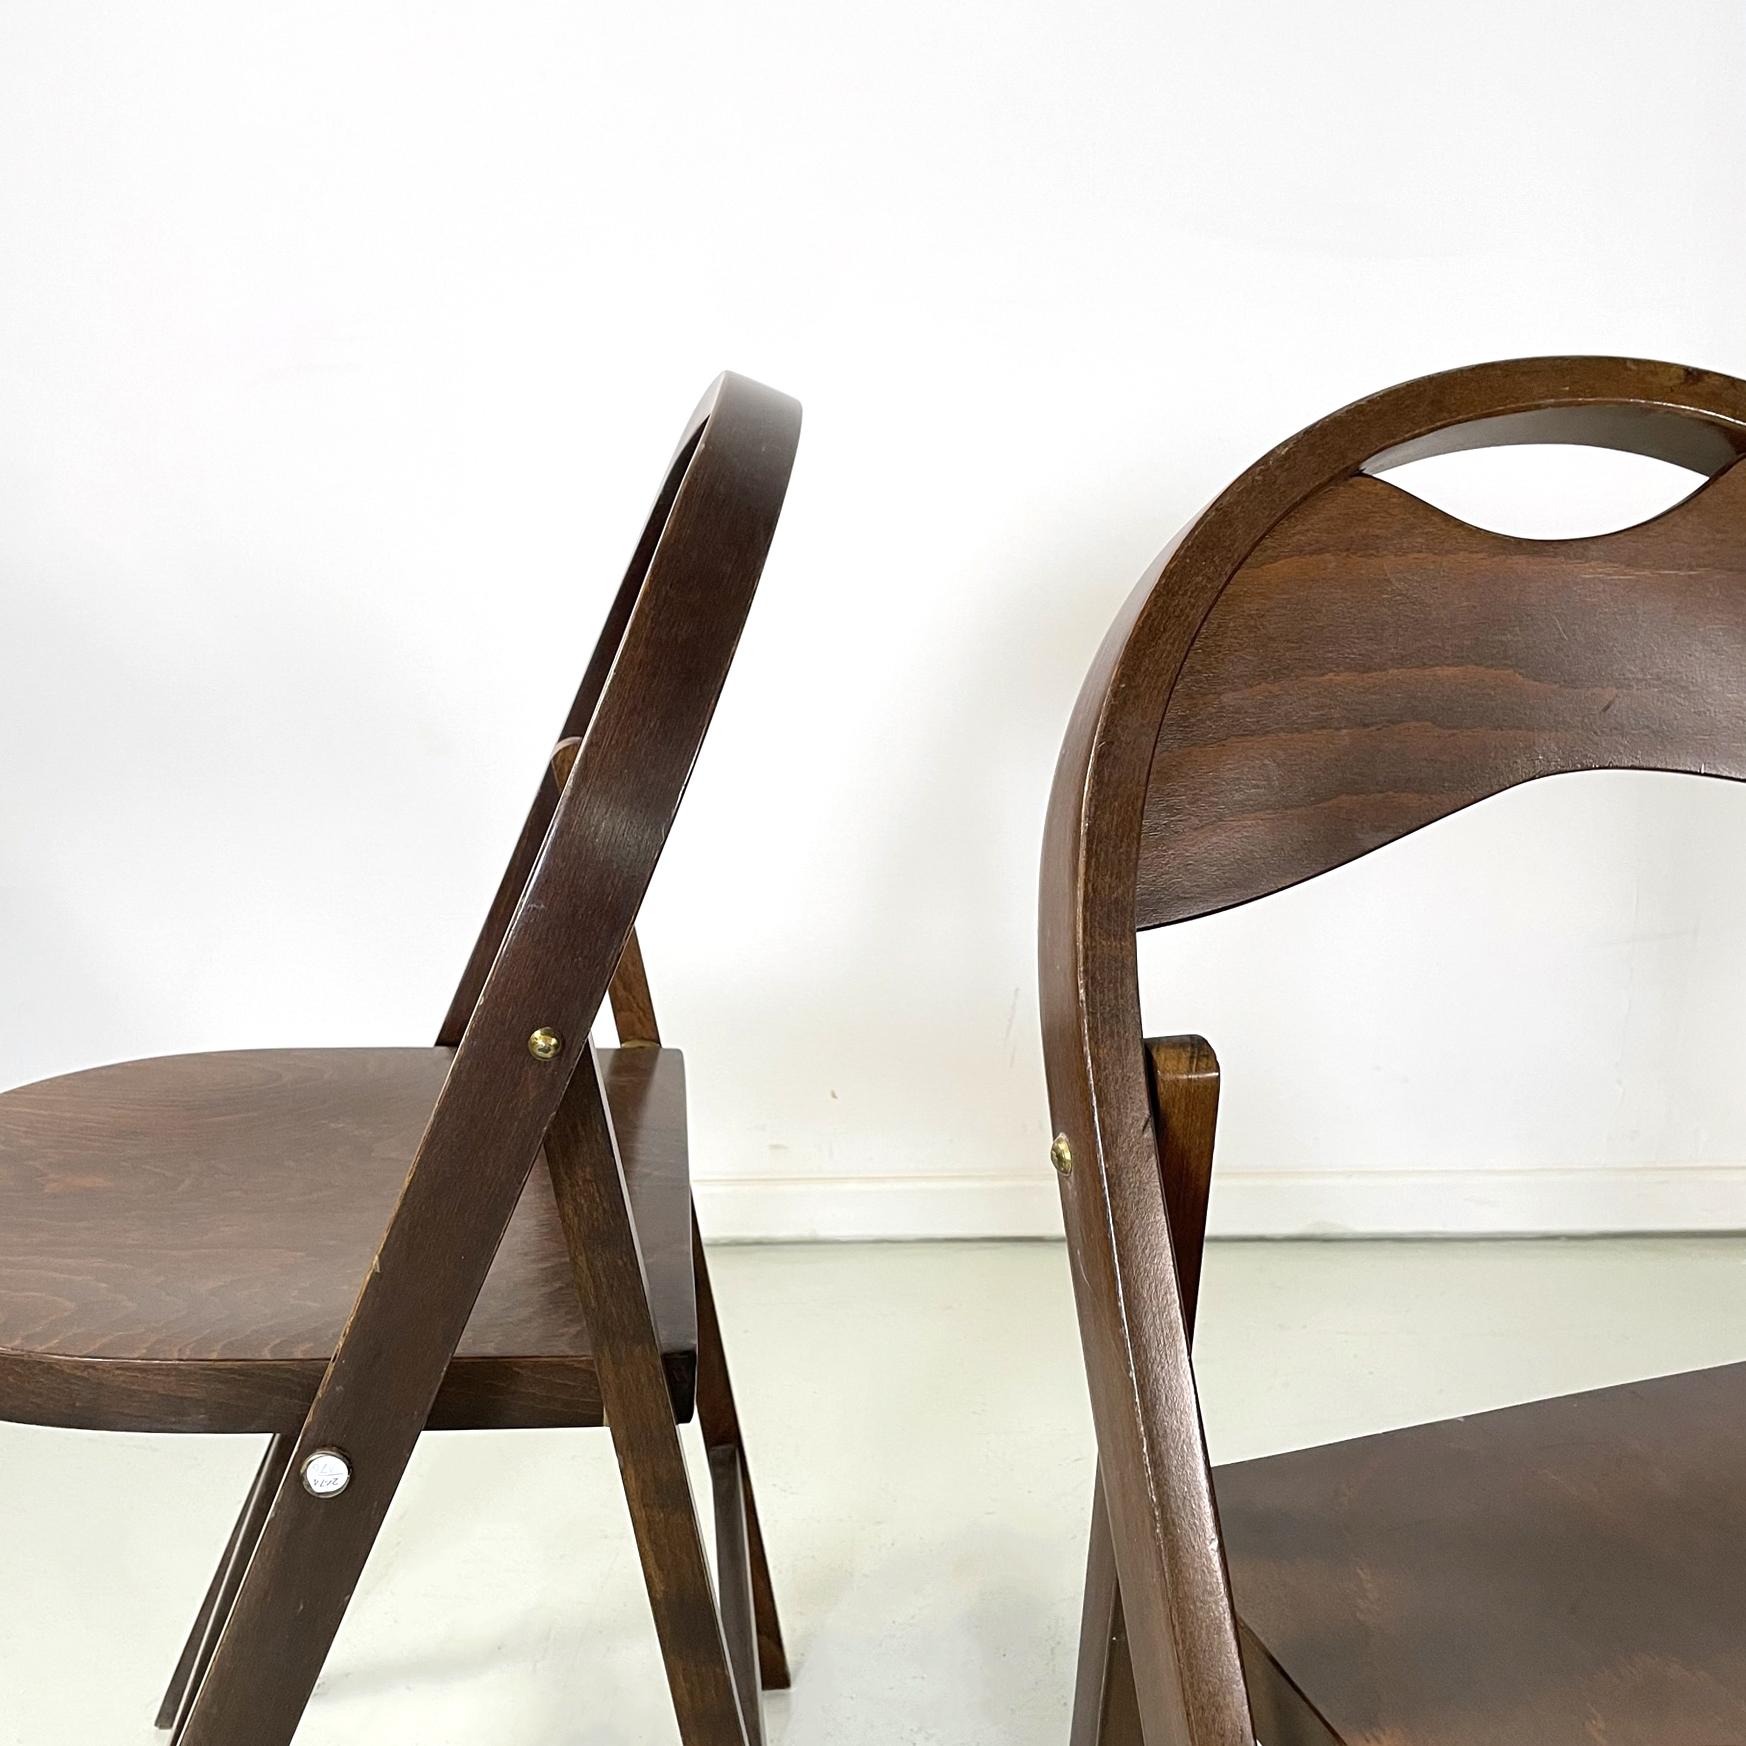 Italian Midcentury Wooden Folding Chairs Tric by Castiglioni, 1960s 3